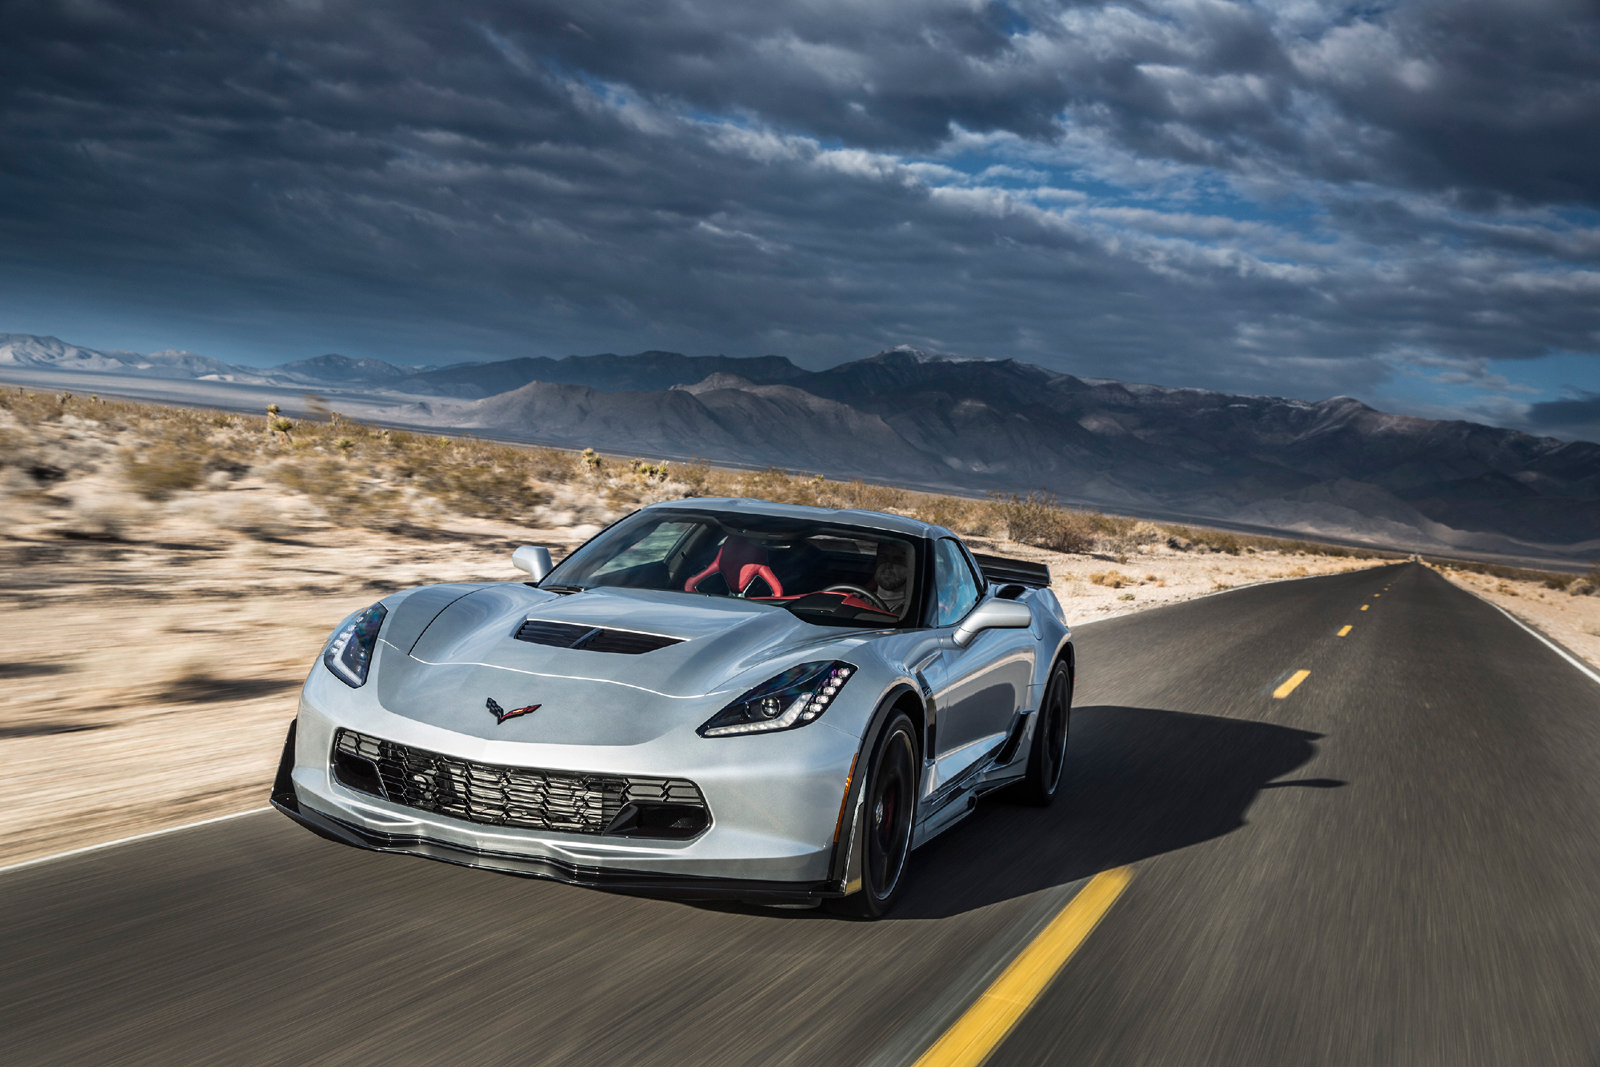 Key Differences Between the C7 Corvette ZR1 and Z06